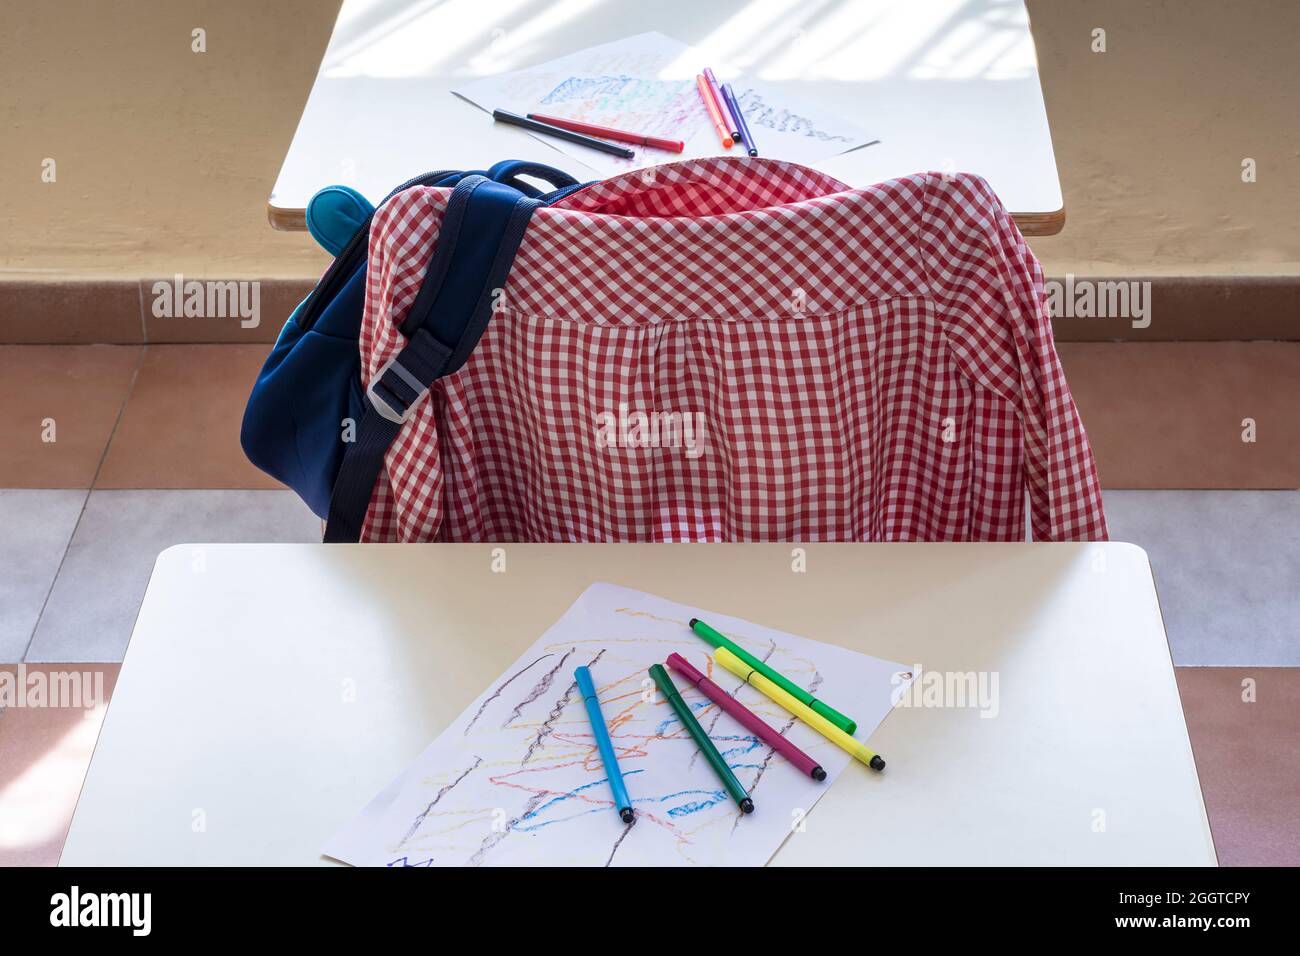 Photograph of the classroom of a primary school.In the photo you can see a school apron hanging on a chair, some drawings and some colored markers.The Stock Photo